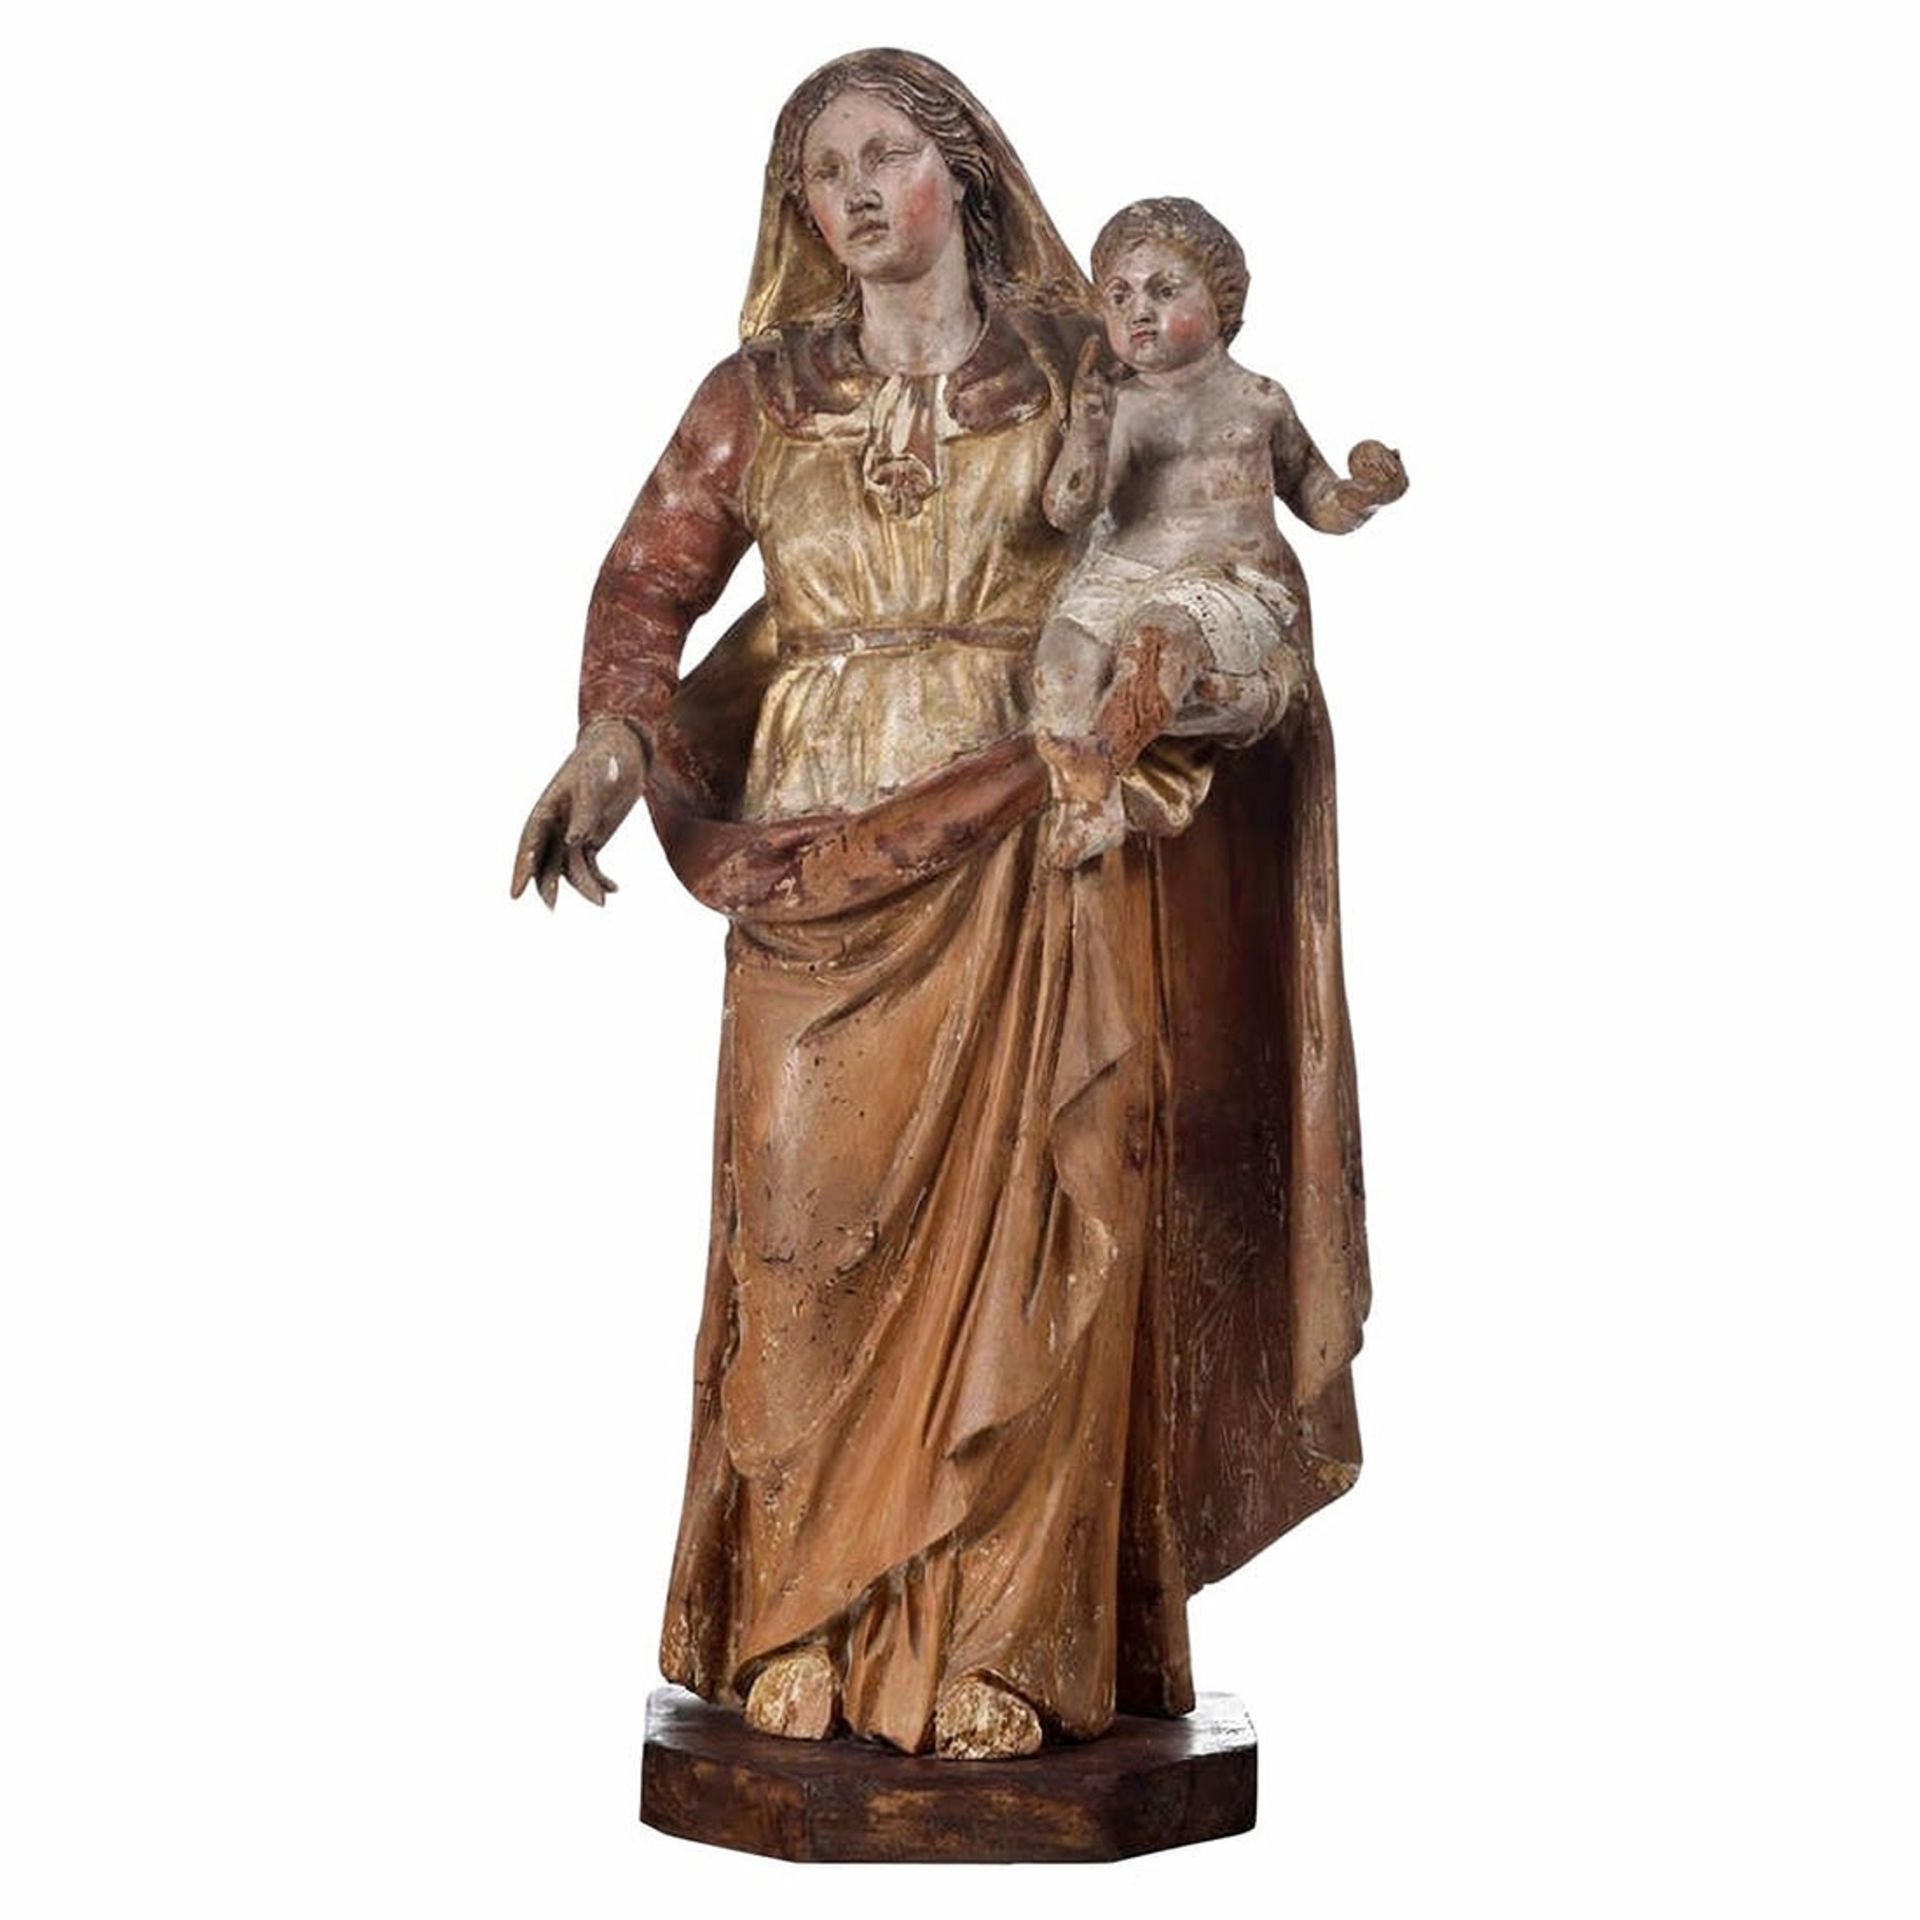 Large Madonna with Enfant Jesus in carved wood, South of Portugal school of the 16th - 17th century - Image 4 of 4